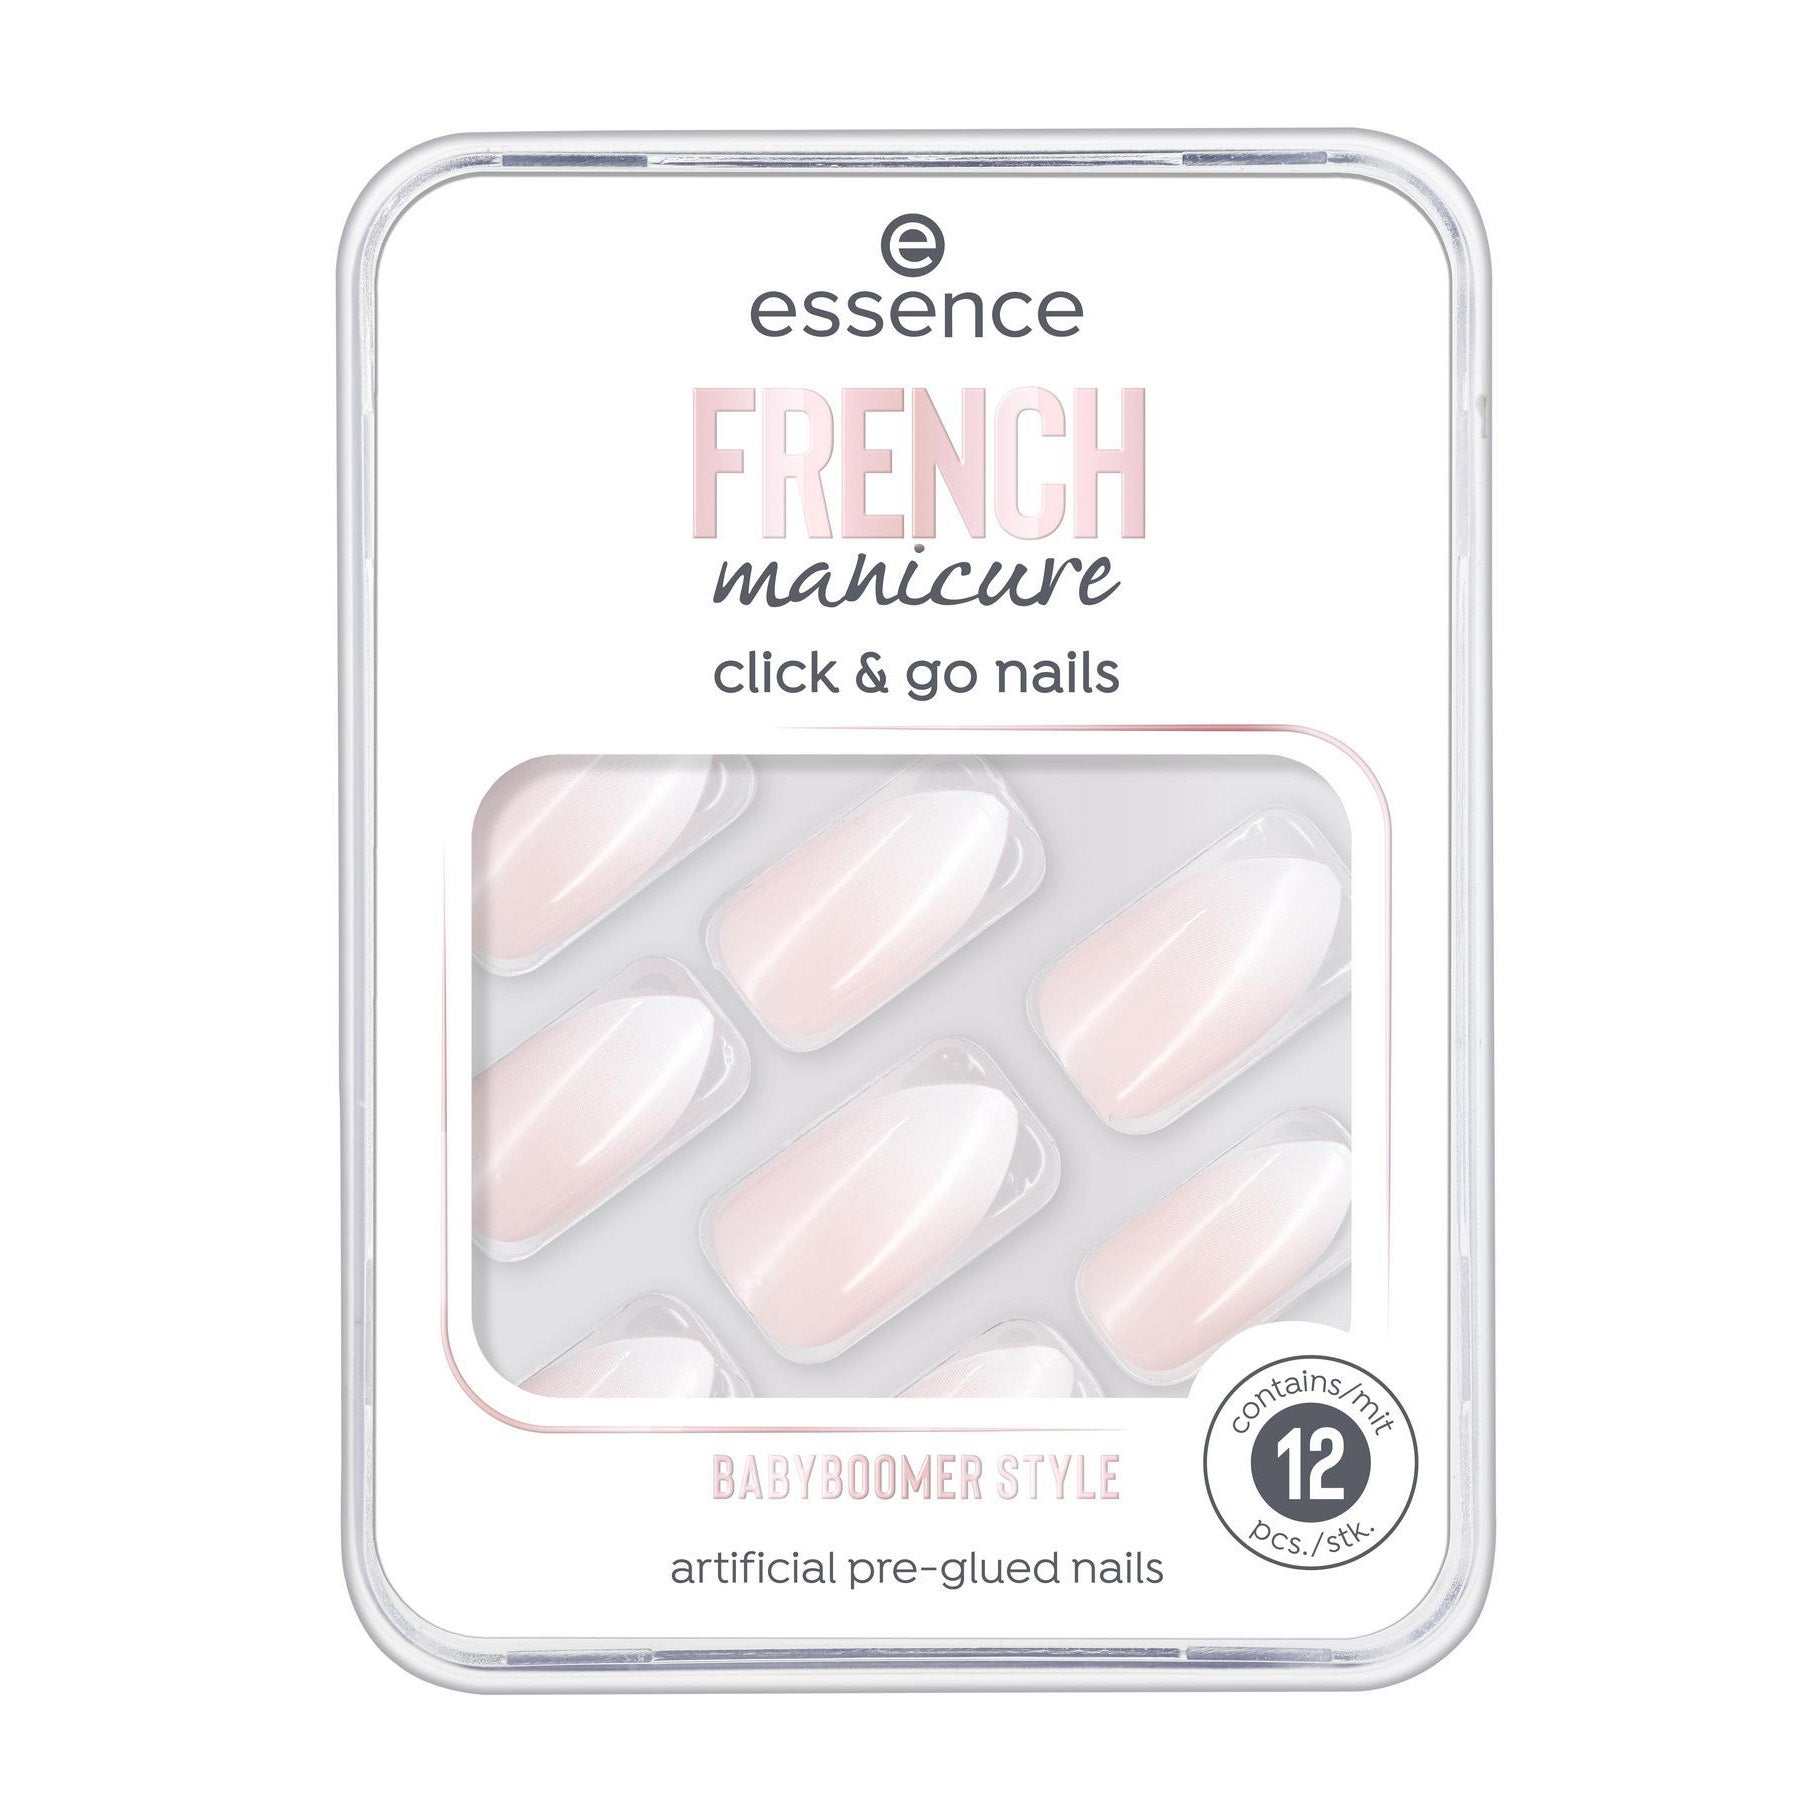 essence French Manicure Click & Go Nails